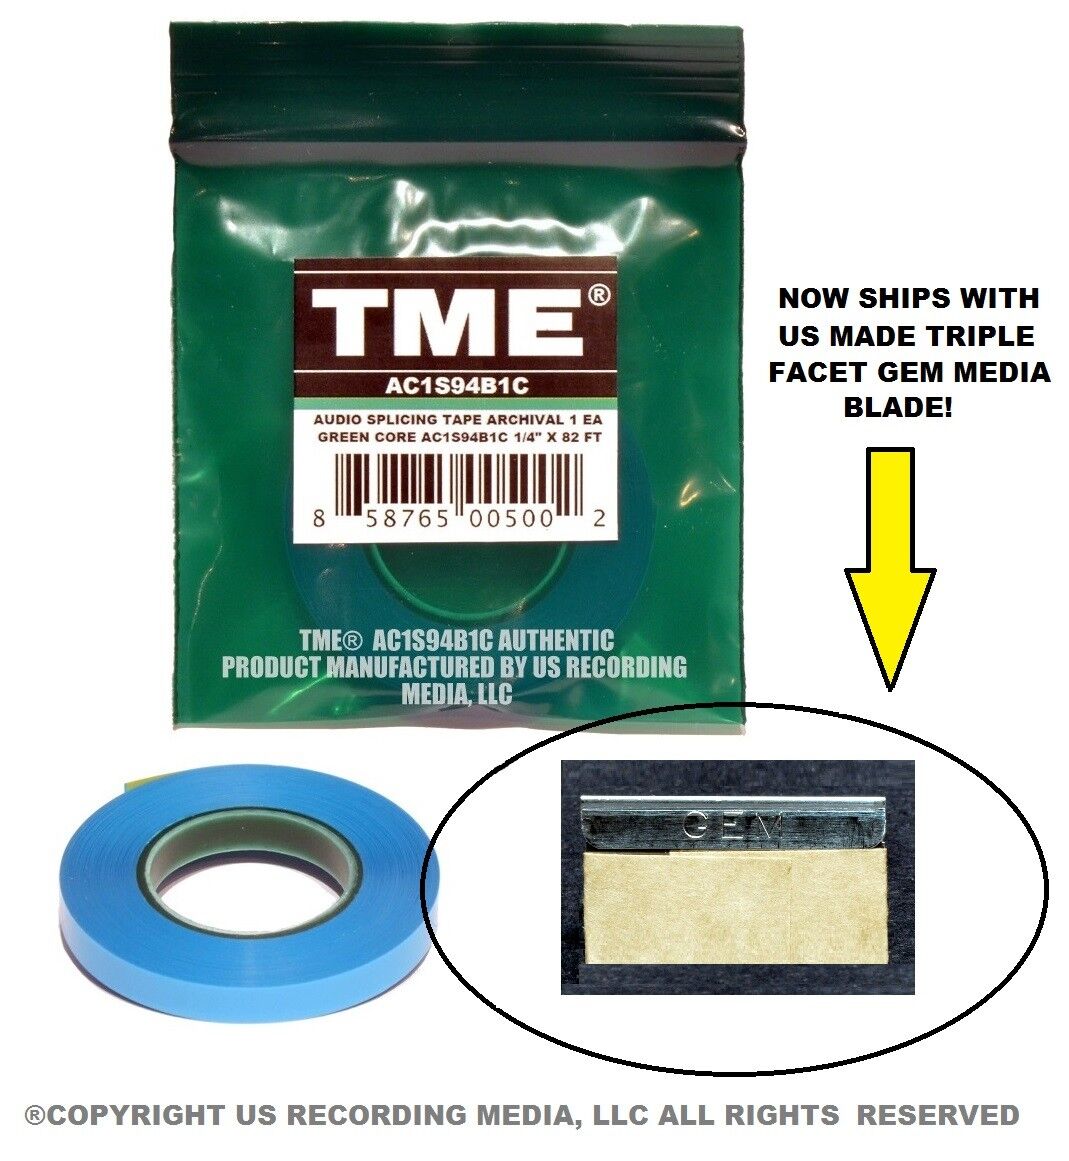 Splicing Tape Open Reel 1/4" X 82' by TME® Pro Studio Grade/Archival with GEM Media Blade